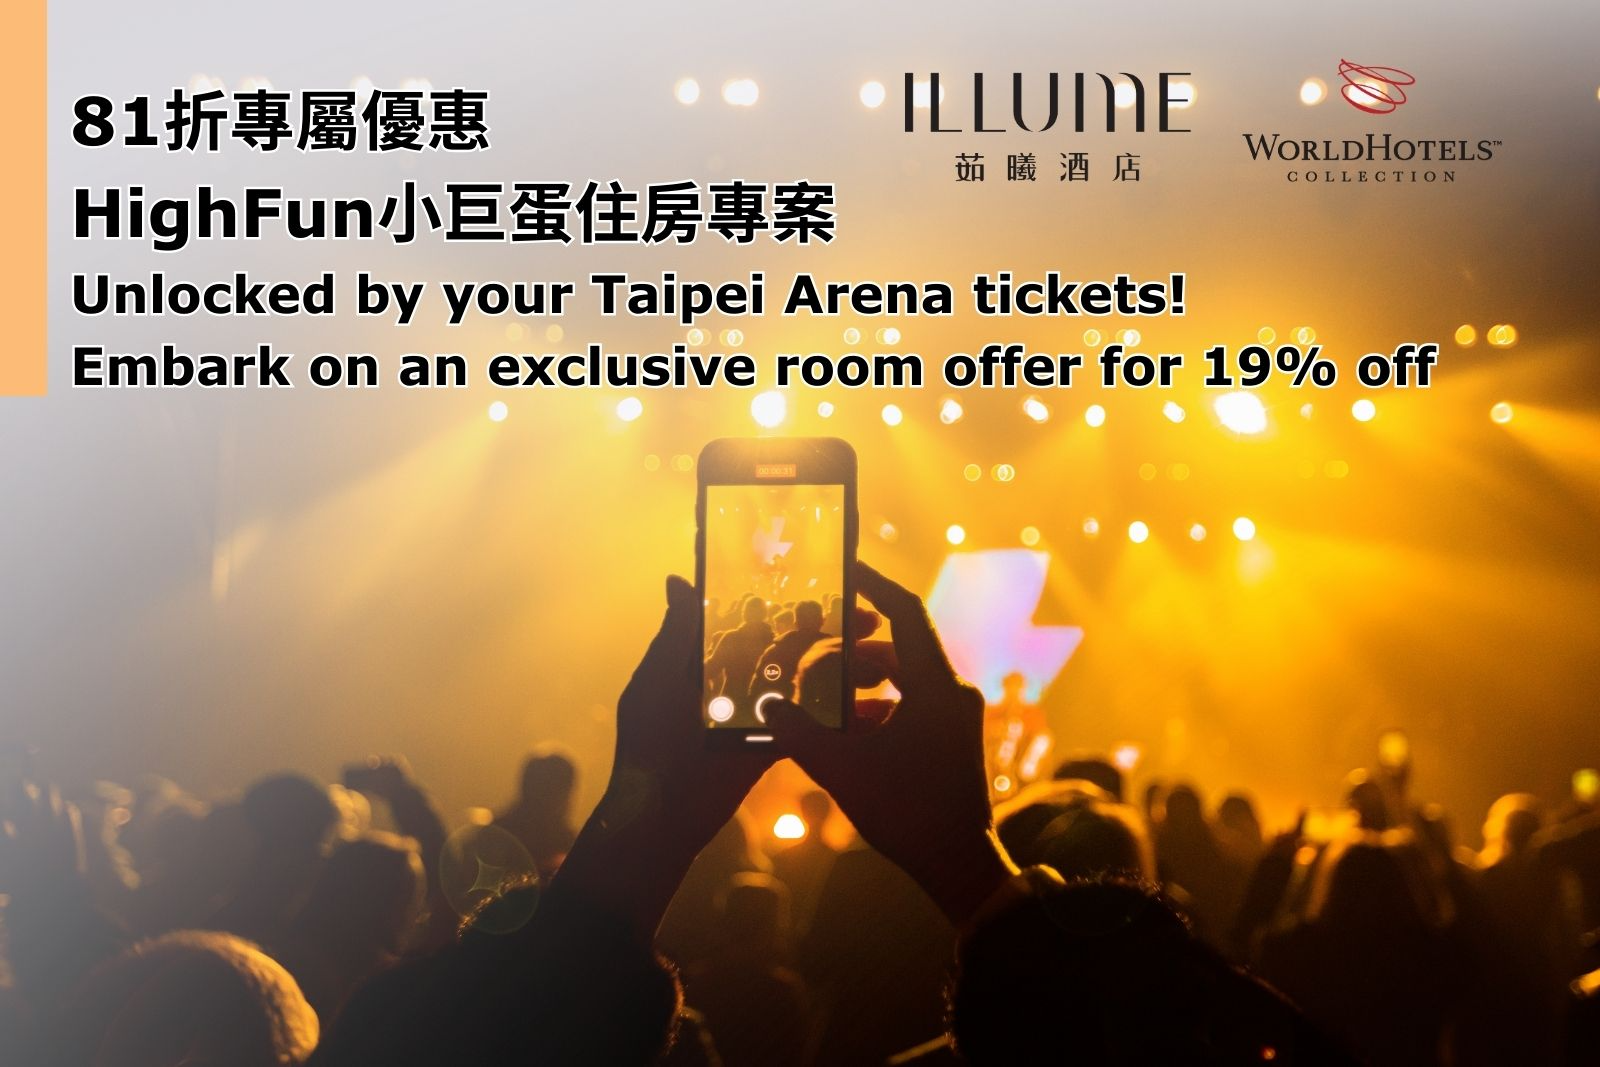 Unlock the extraordinary with your Taipei Arena tickets! Experience exclusivity with a 19% discount on our premium room offer.